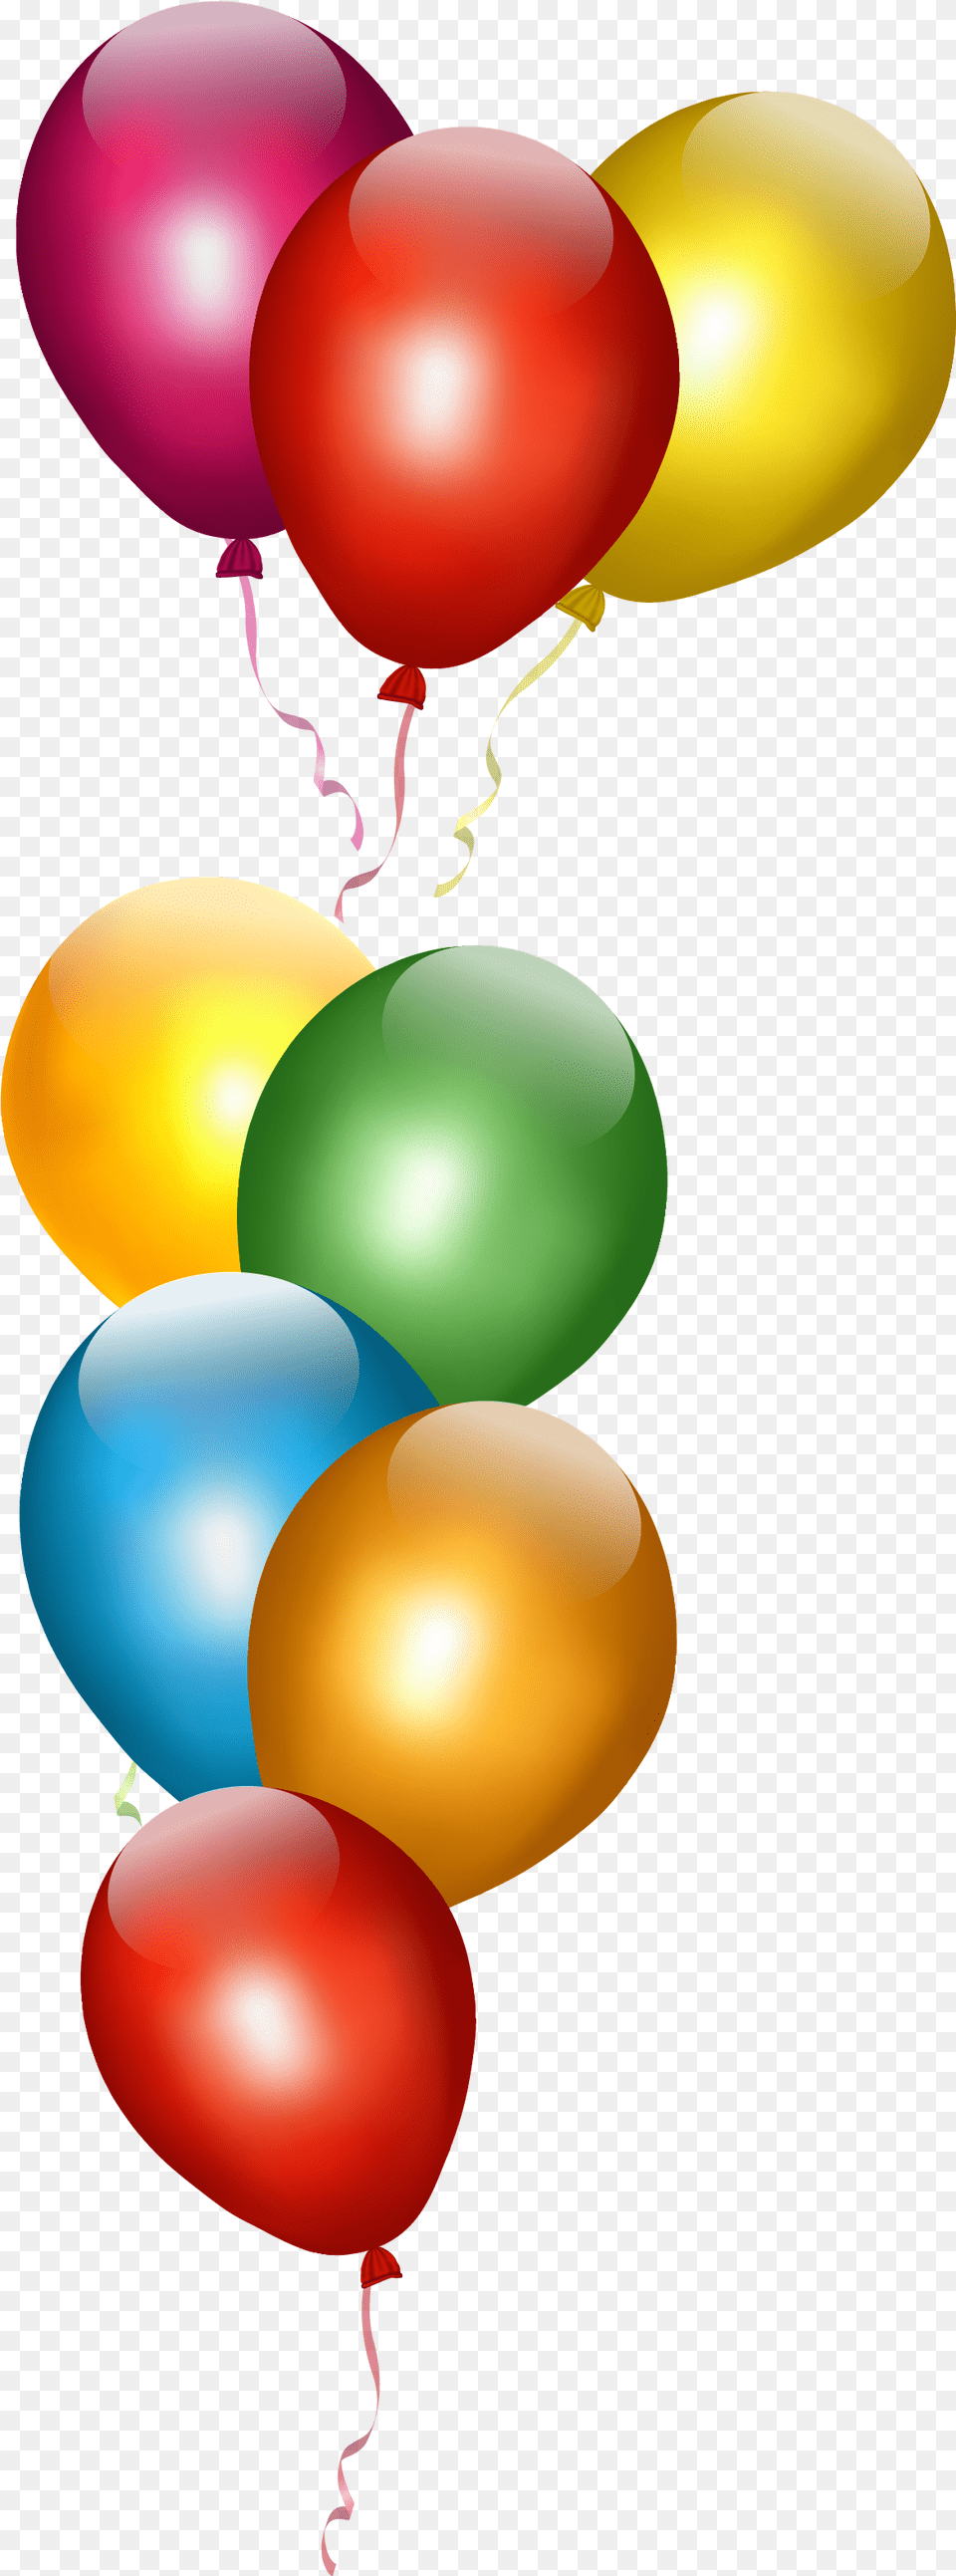 Party Toy Balloon Birthday Gift Birthday Balloons Free Transparent Png